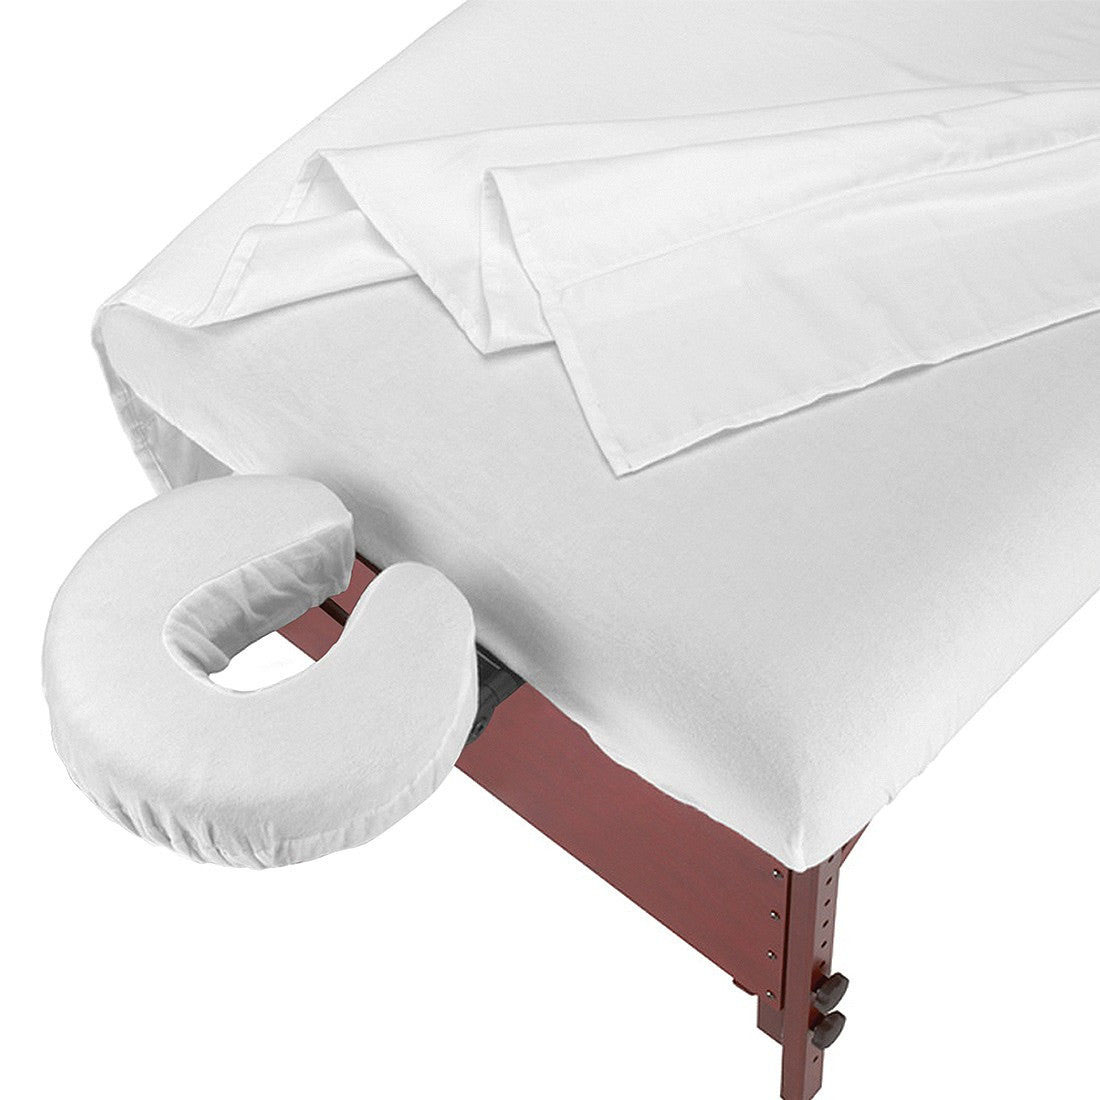 Master Massage Table Sheet Set, DELUXE, 100% Cotton Flannel, 3 Piece